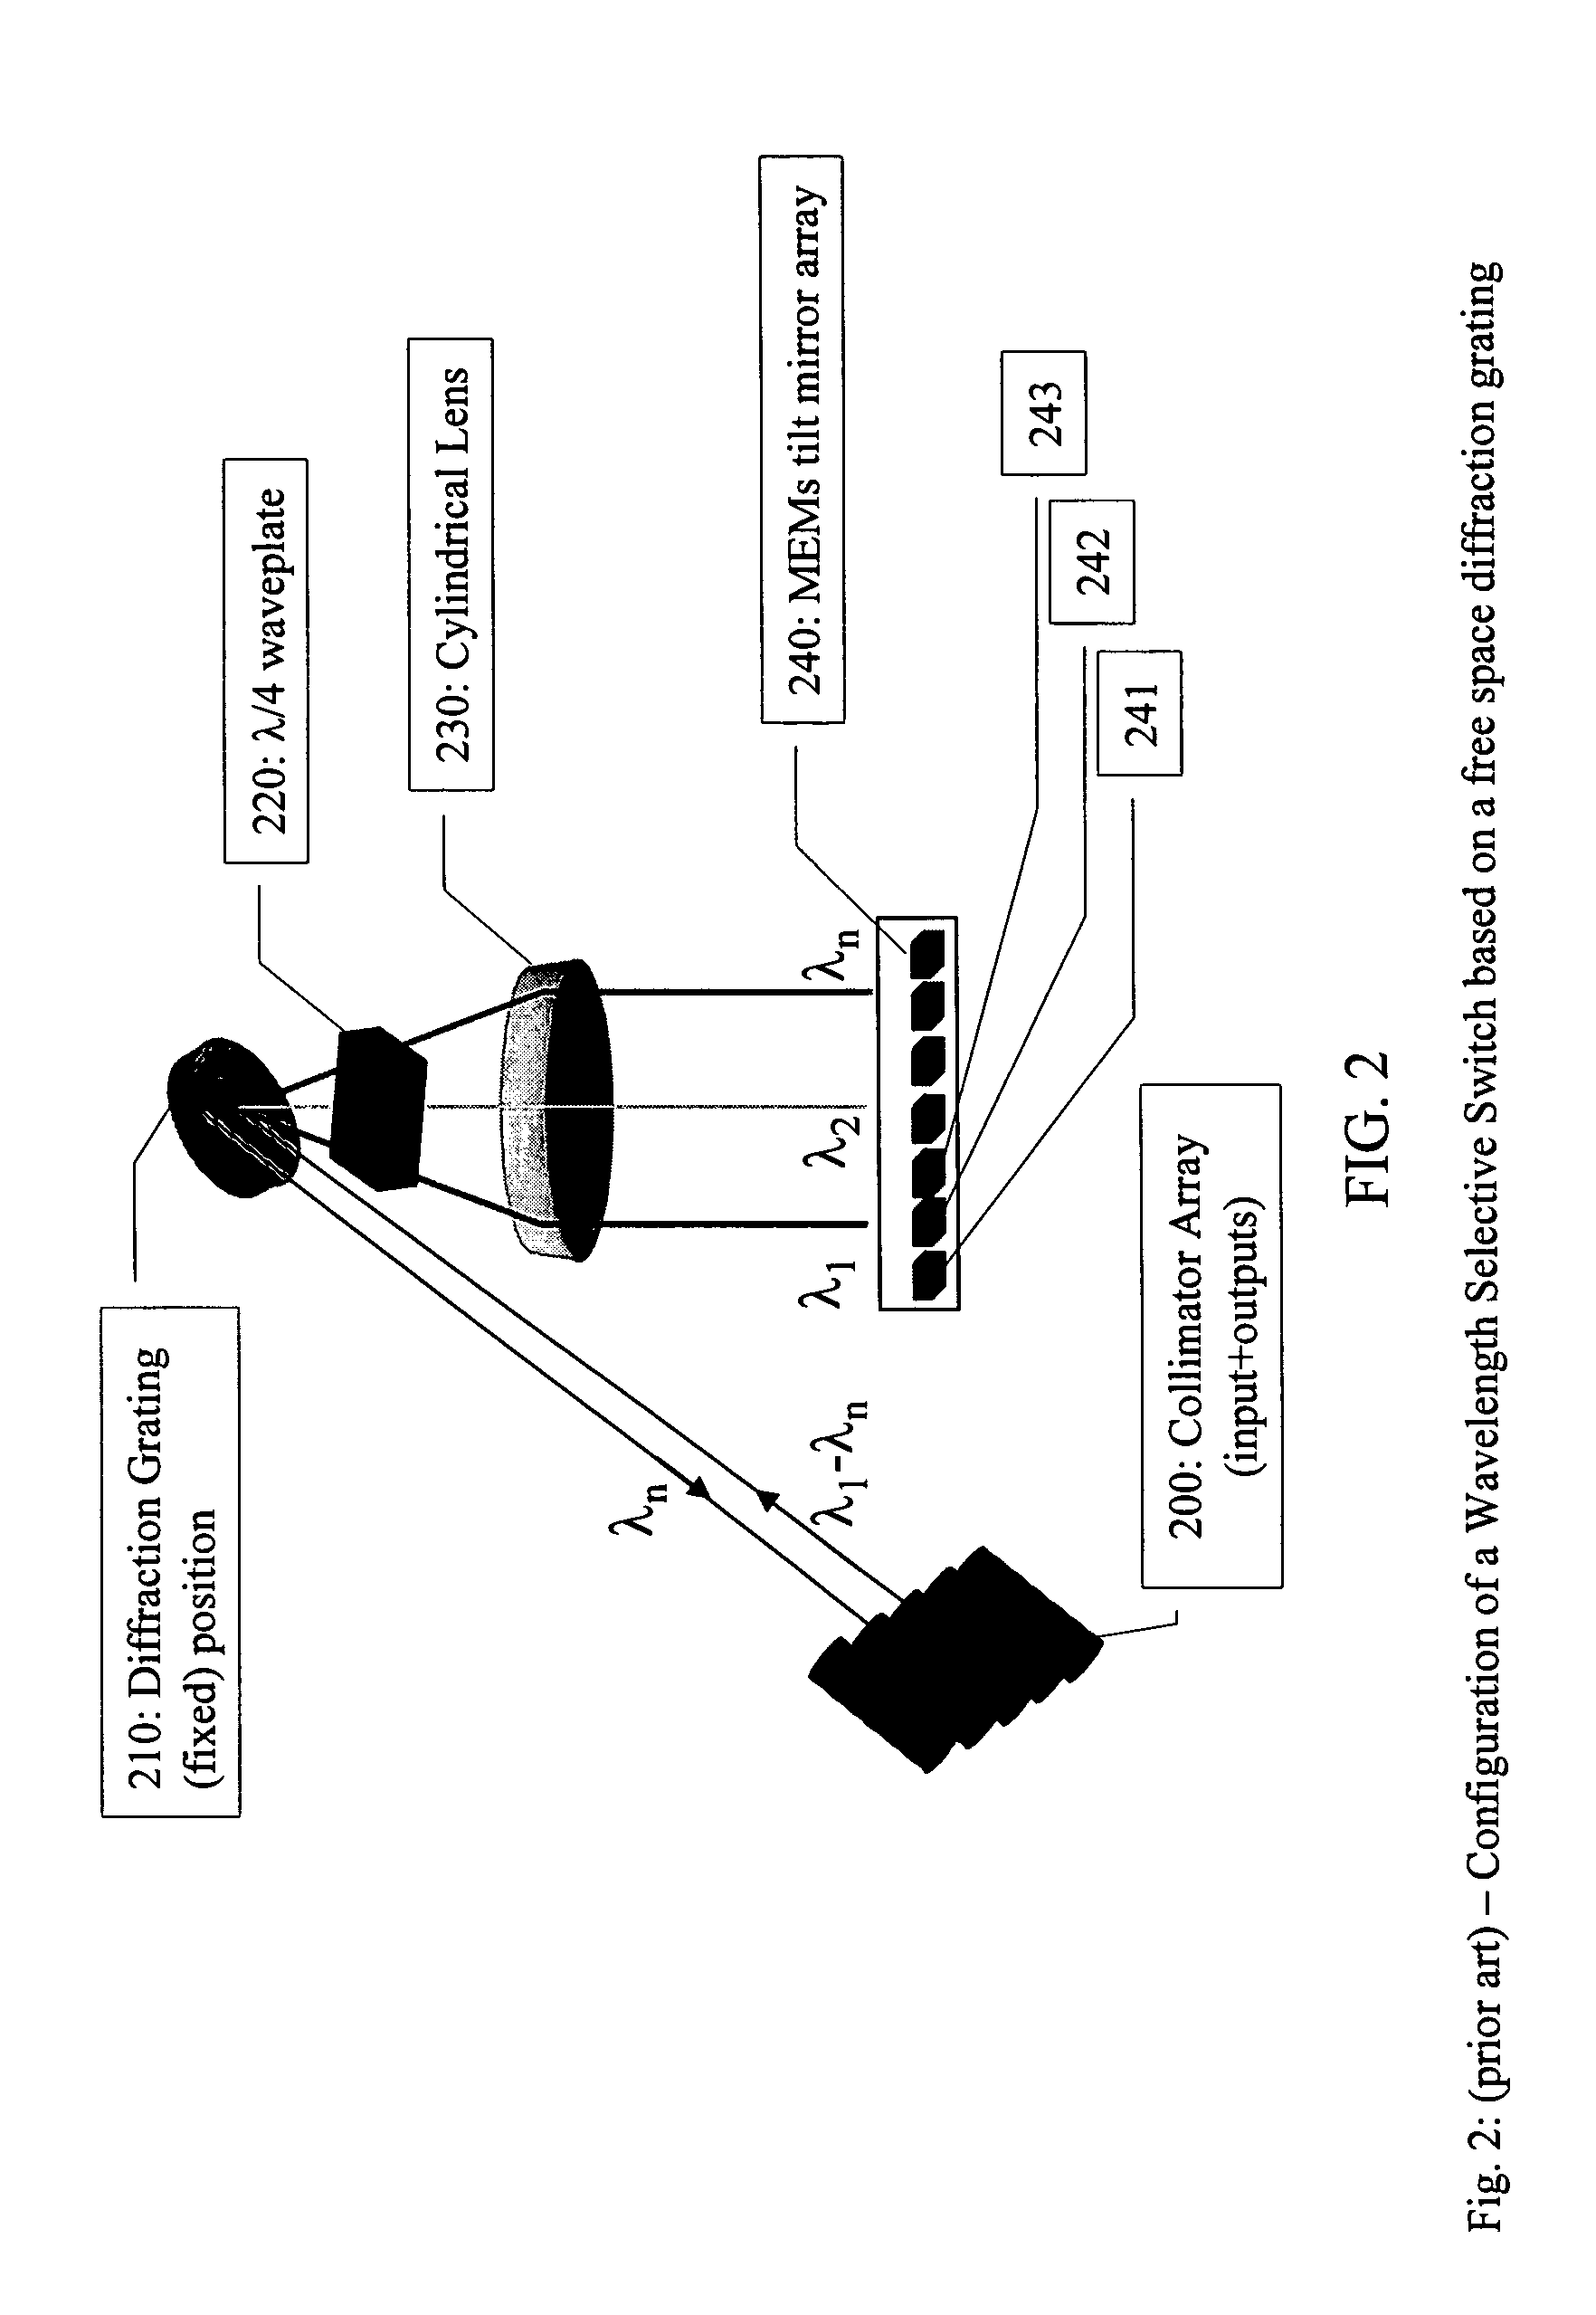 Tunable optical routing systems